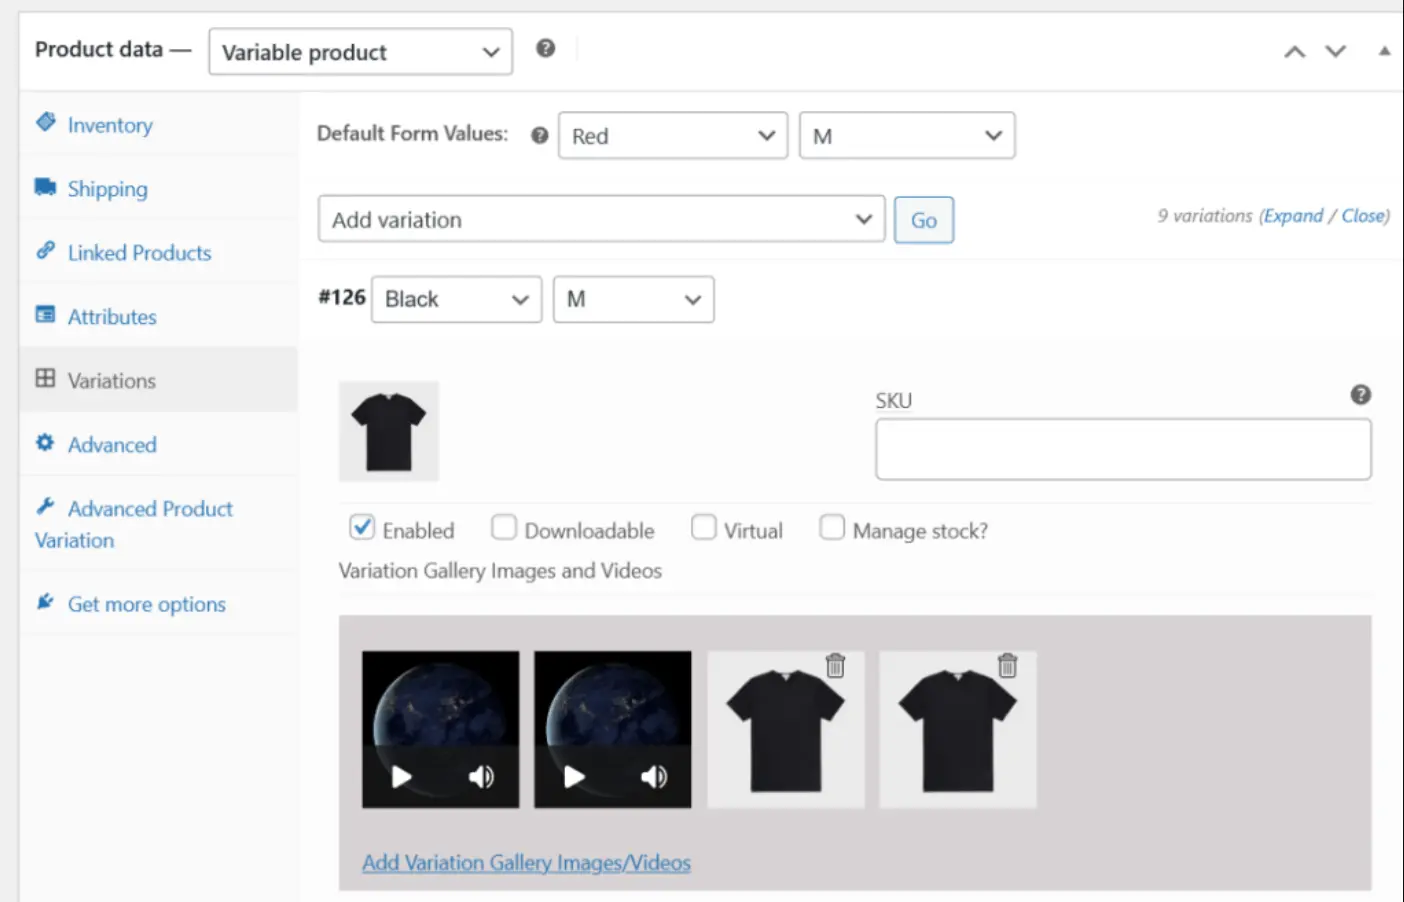 customize woocommerce product page